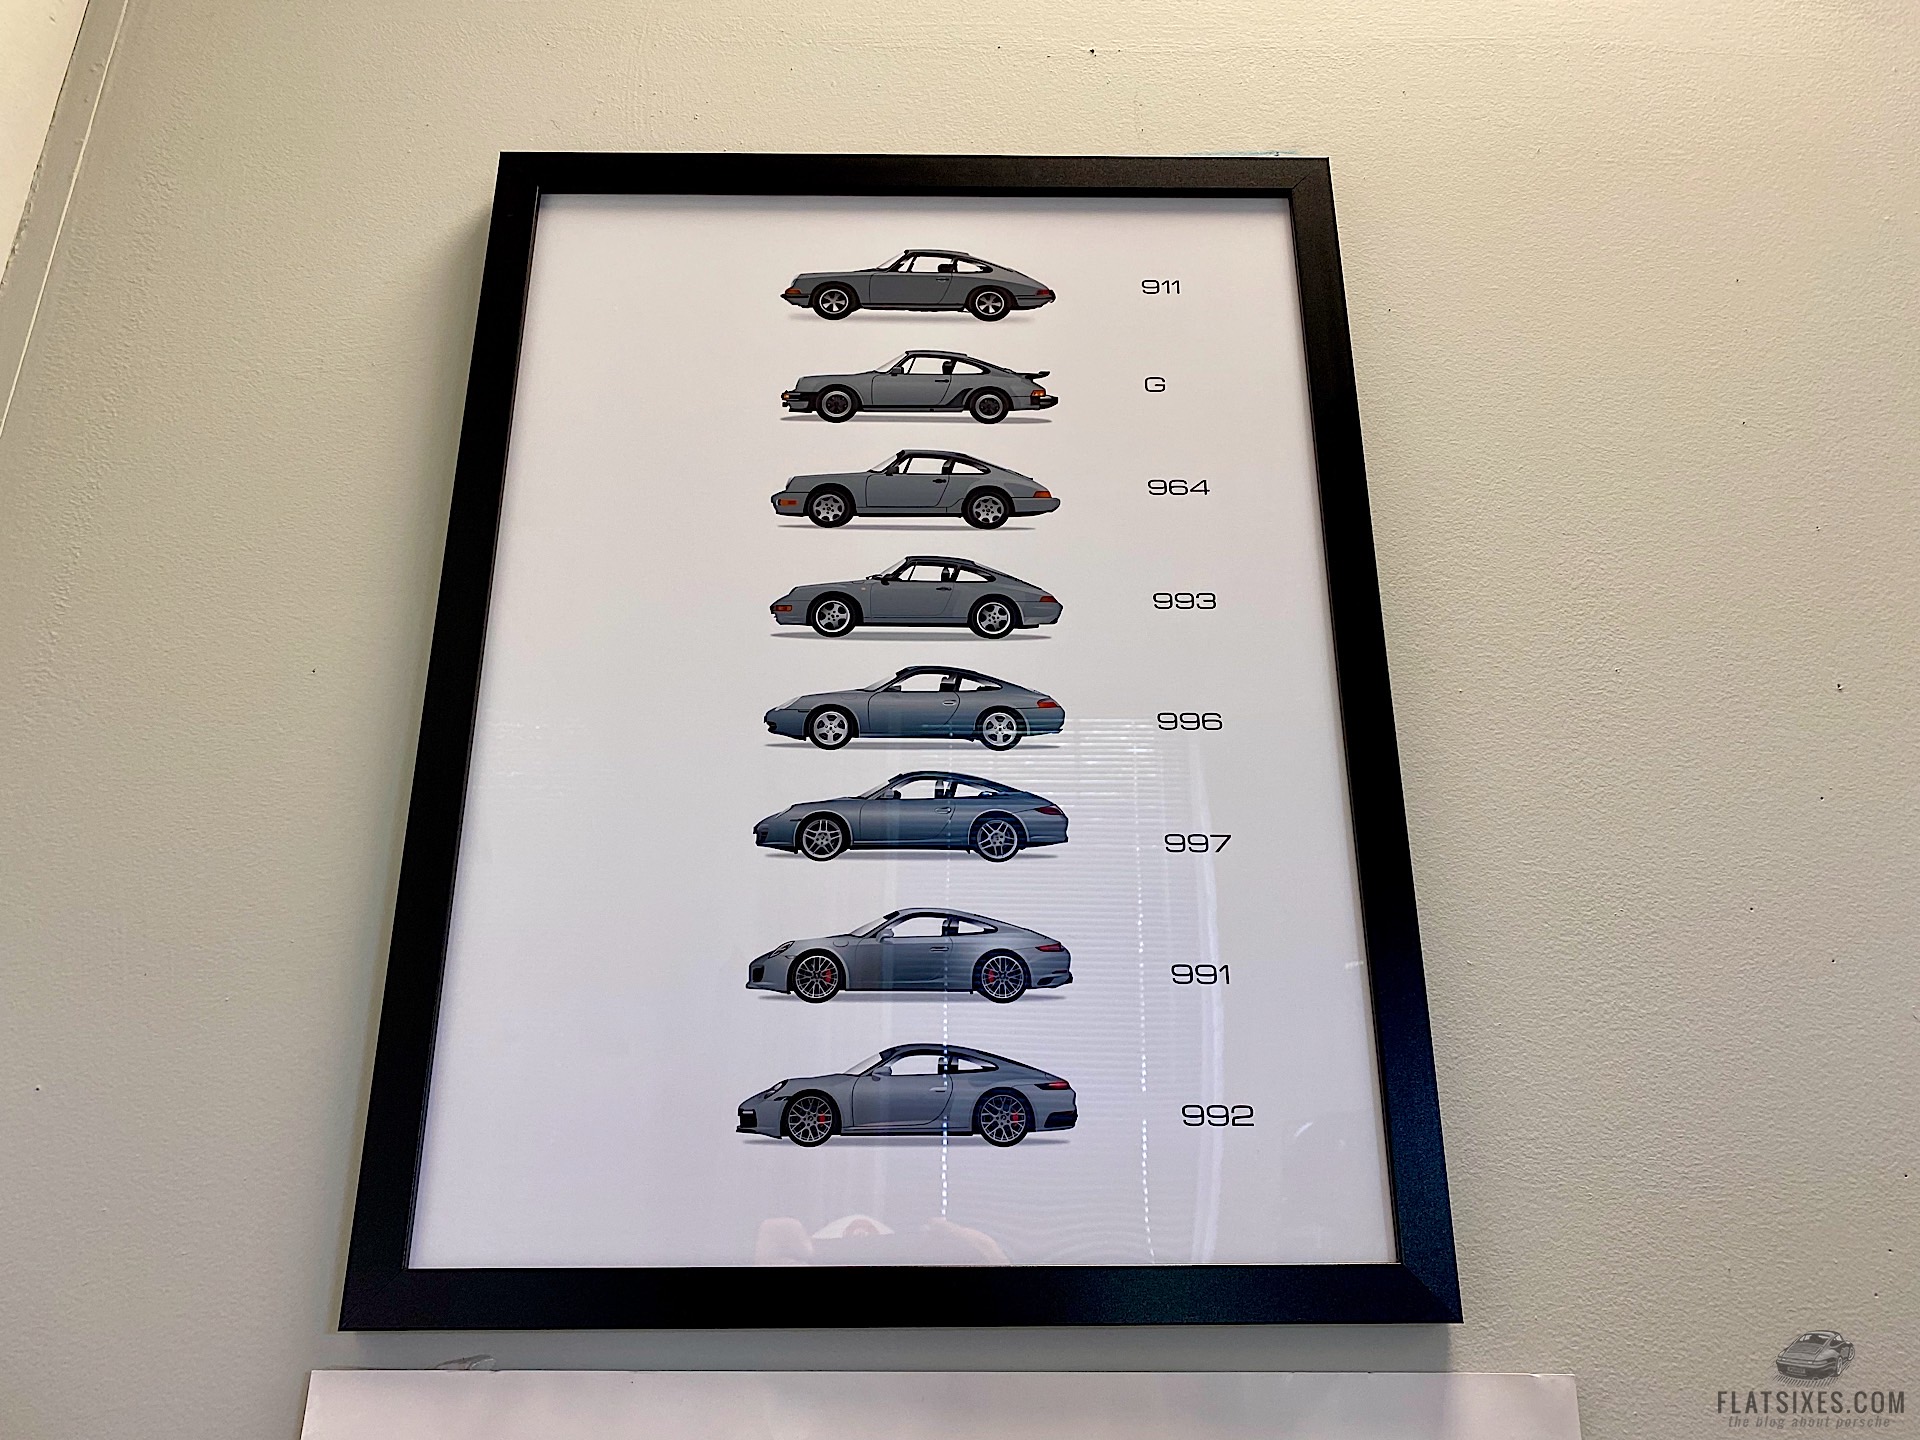 Get Your Dad Custom Porsche Car Art for Fathers Day - Built For Speed